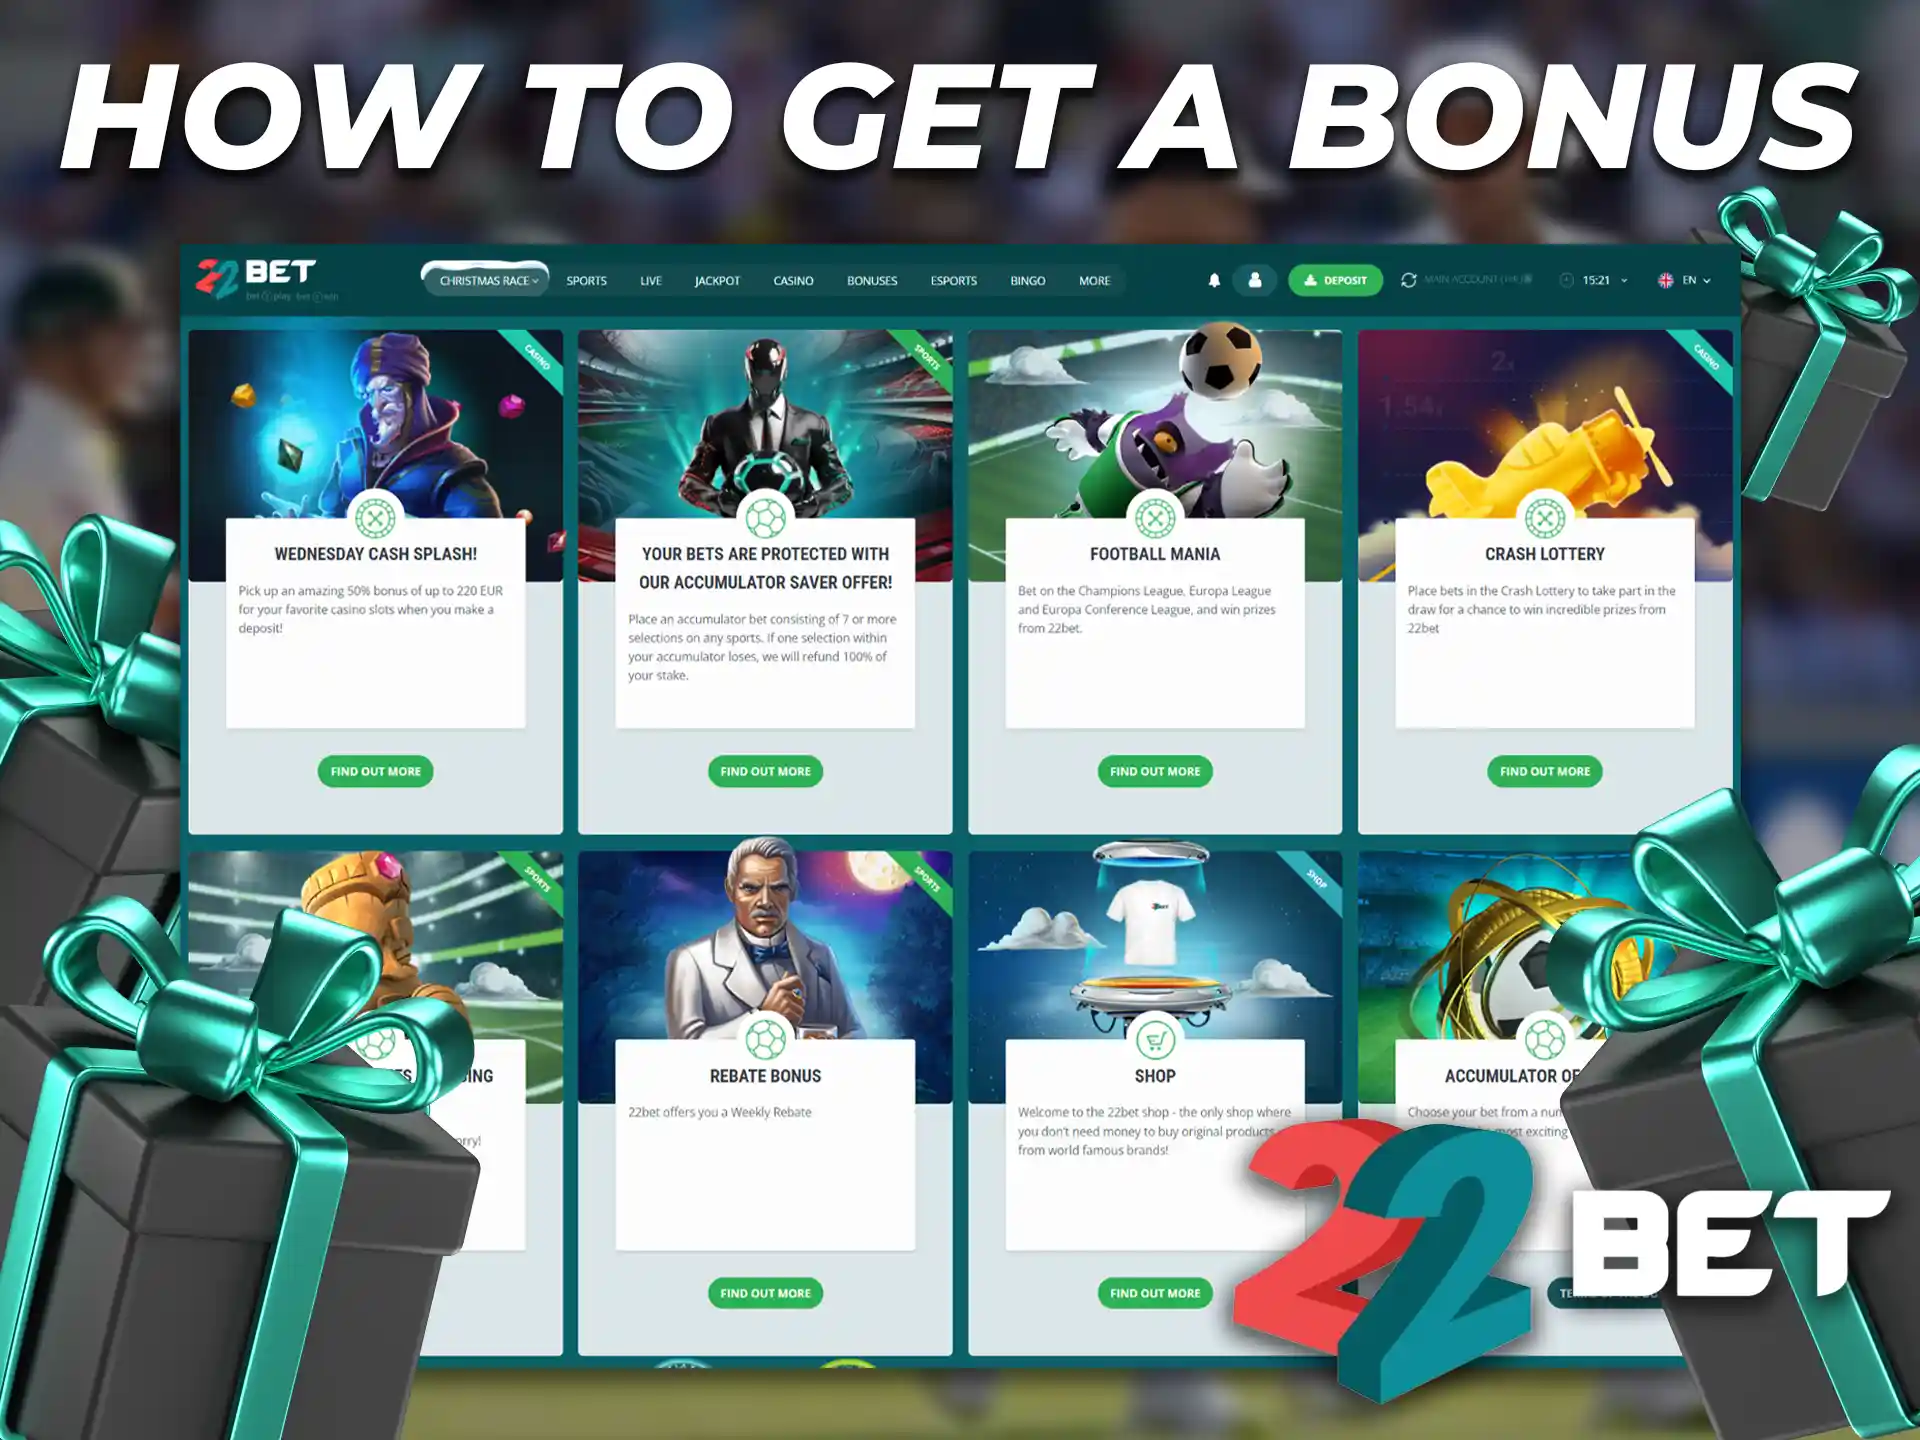 Use the step-by-step instructions to claim your 22Bet welcome bonus.